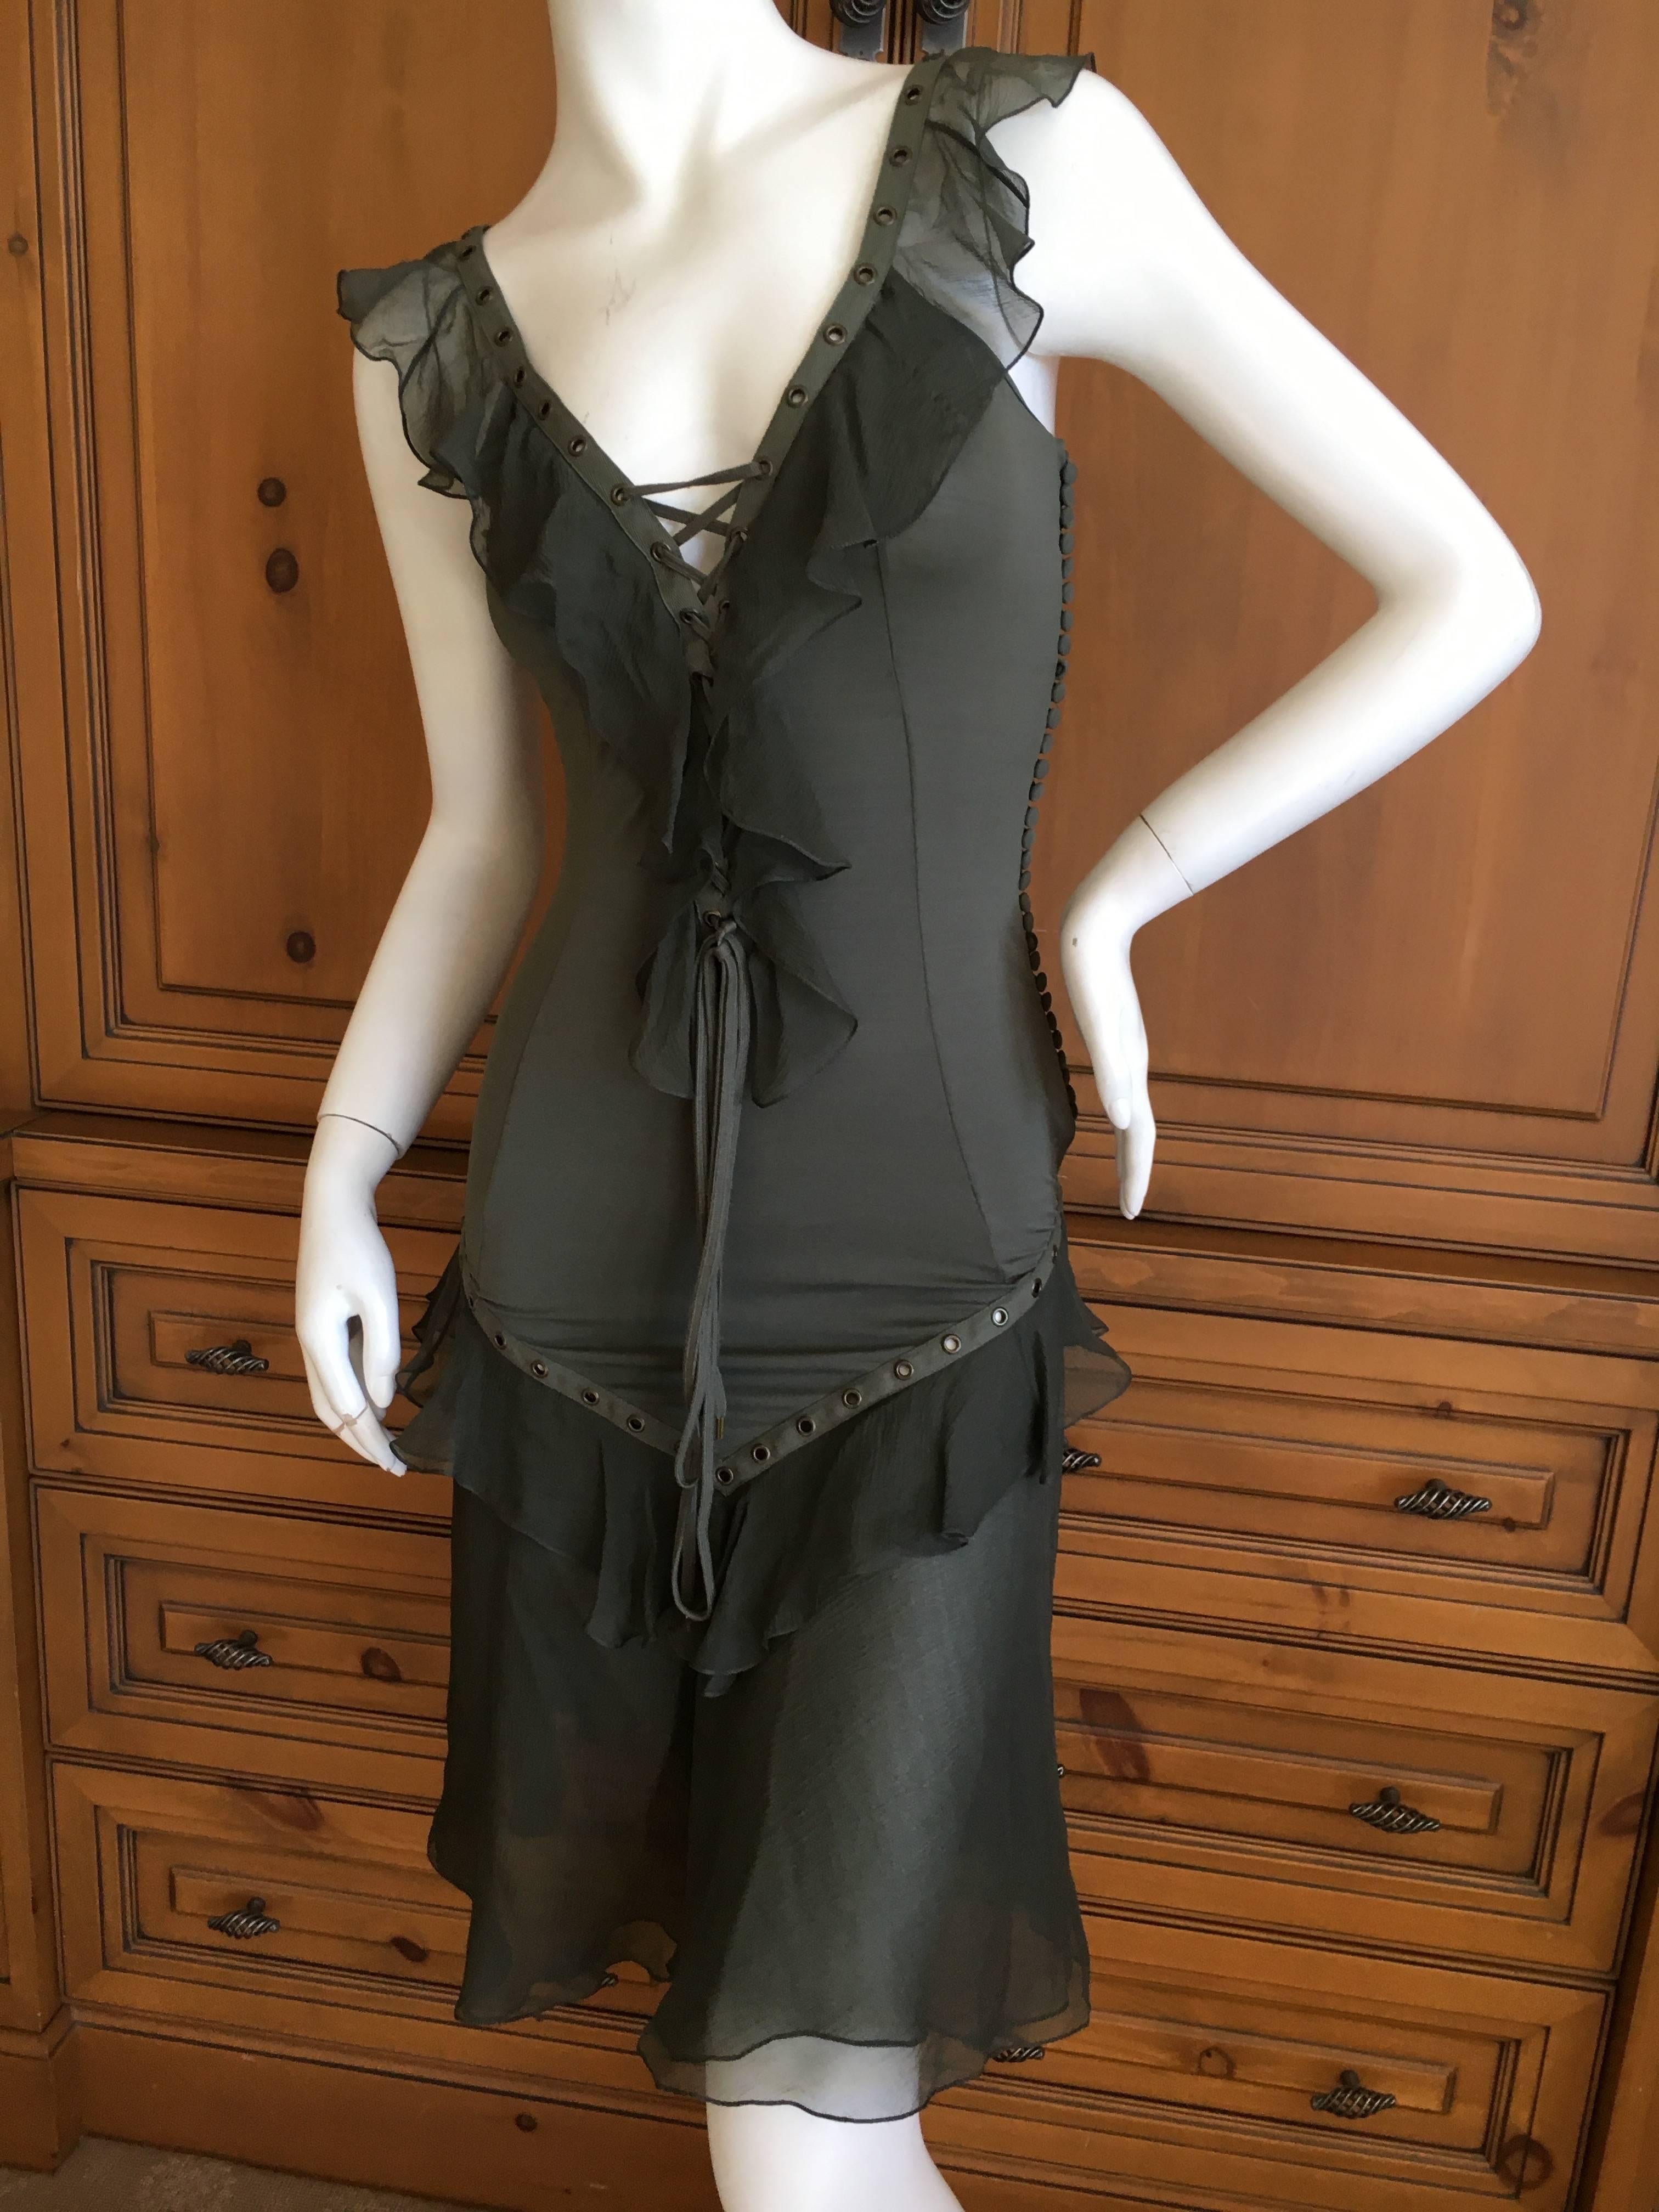 Christian Dior by John Galliano Moss Green Corset Lace Ruffled Silk Dress In Excellent Condition For Sale In Cloverdale, CA